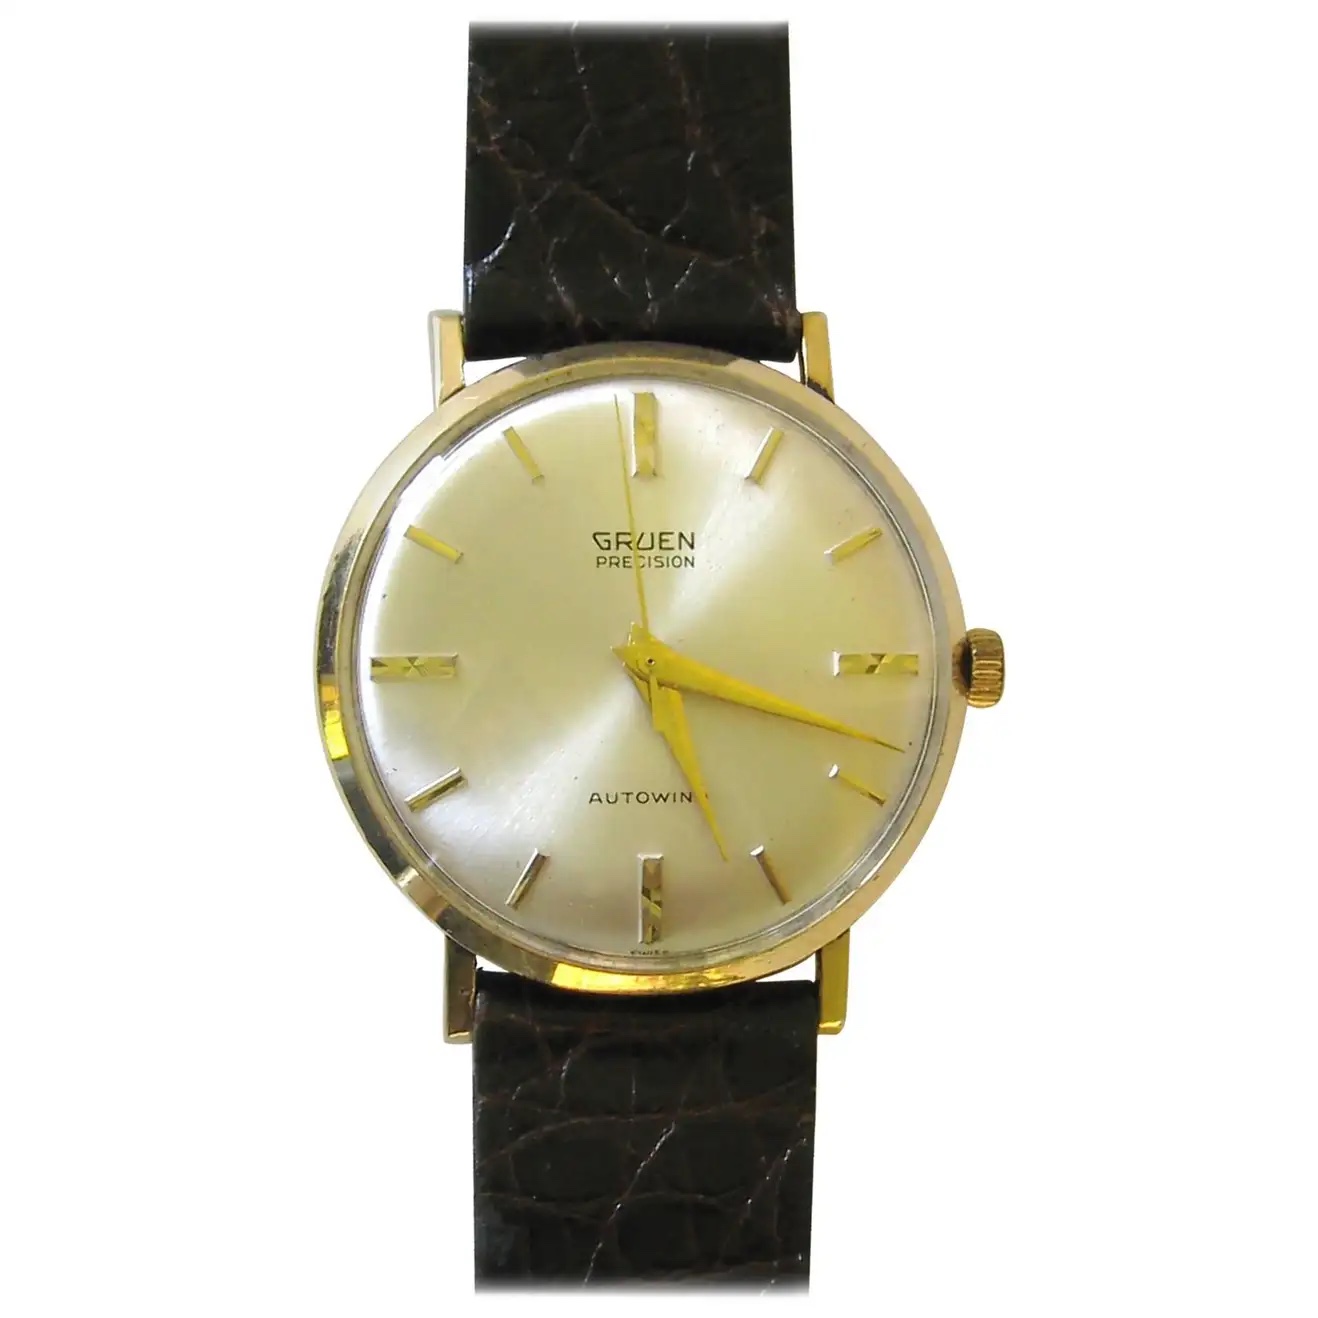 GRUEN PRECISION 18K YELLOW-GOLD WATCH, 1960S, OFFERED BY PARK AVENUE COUTURE